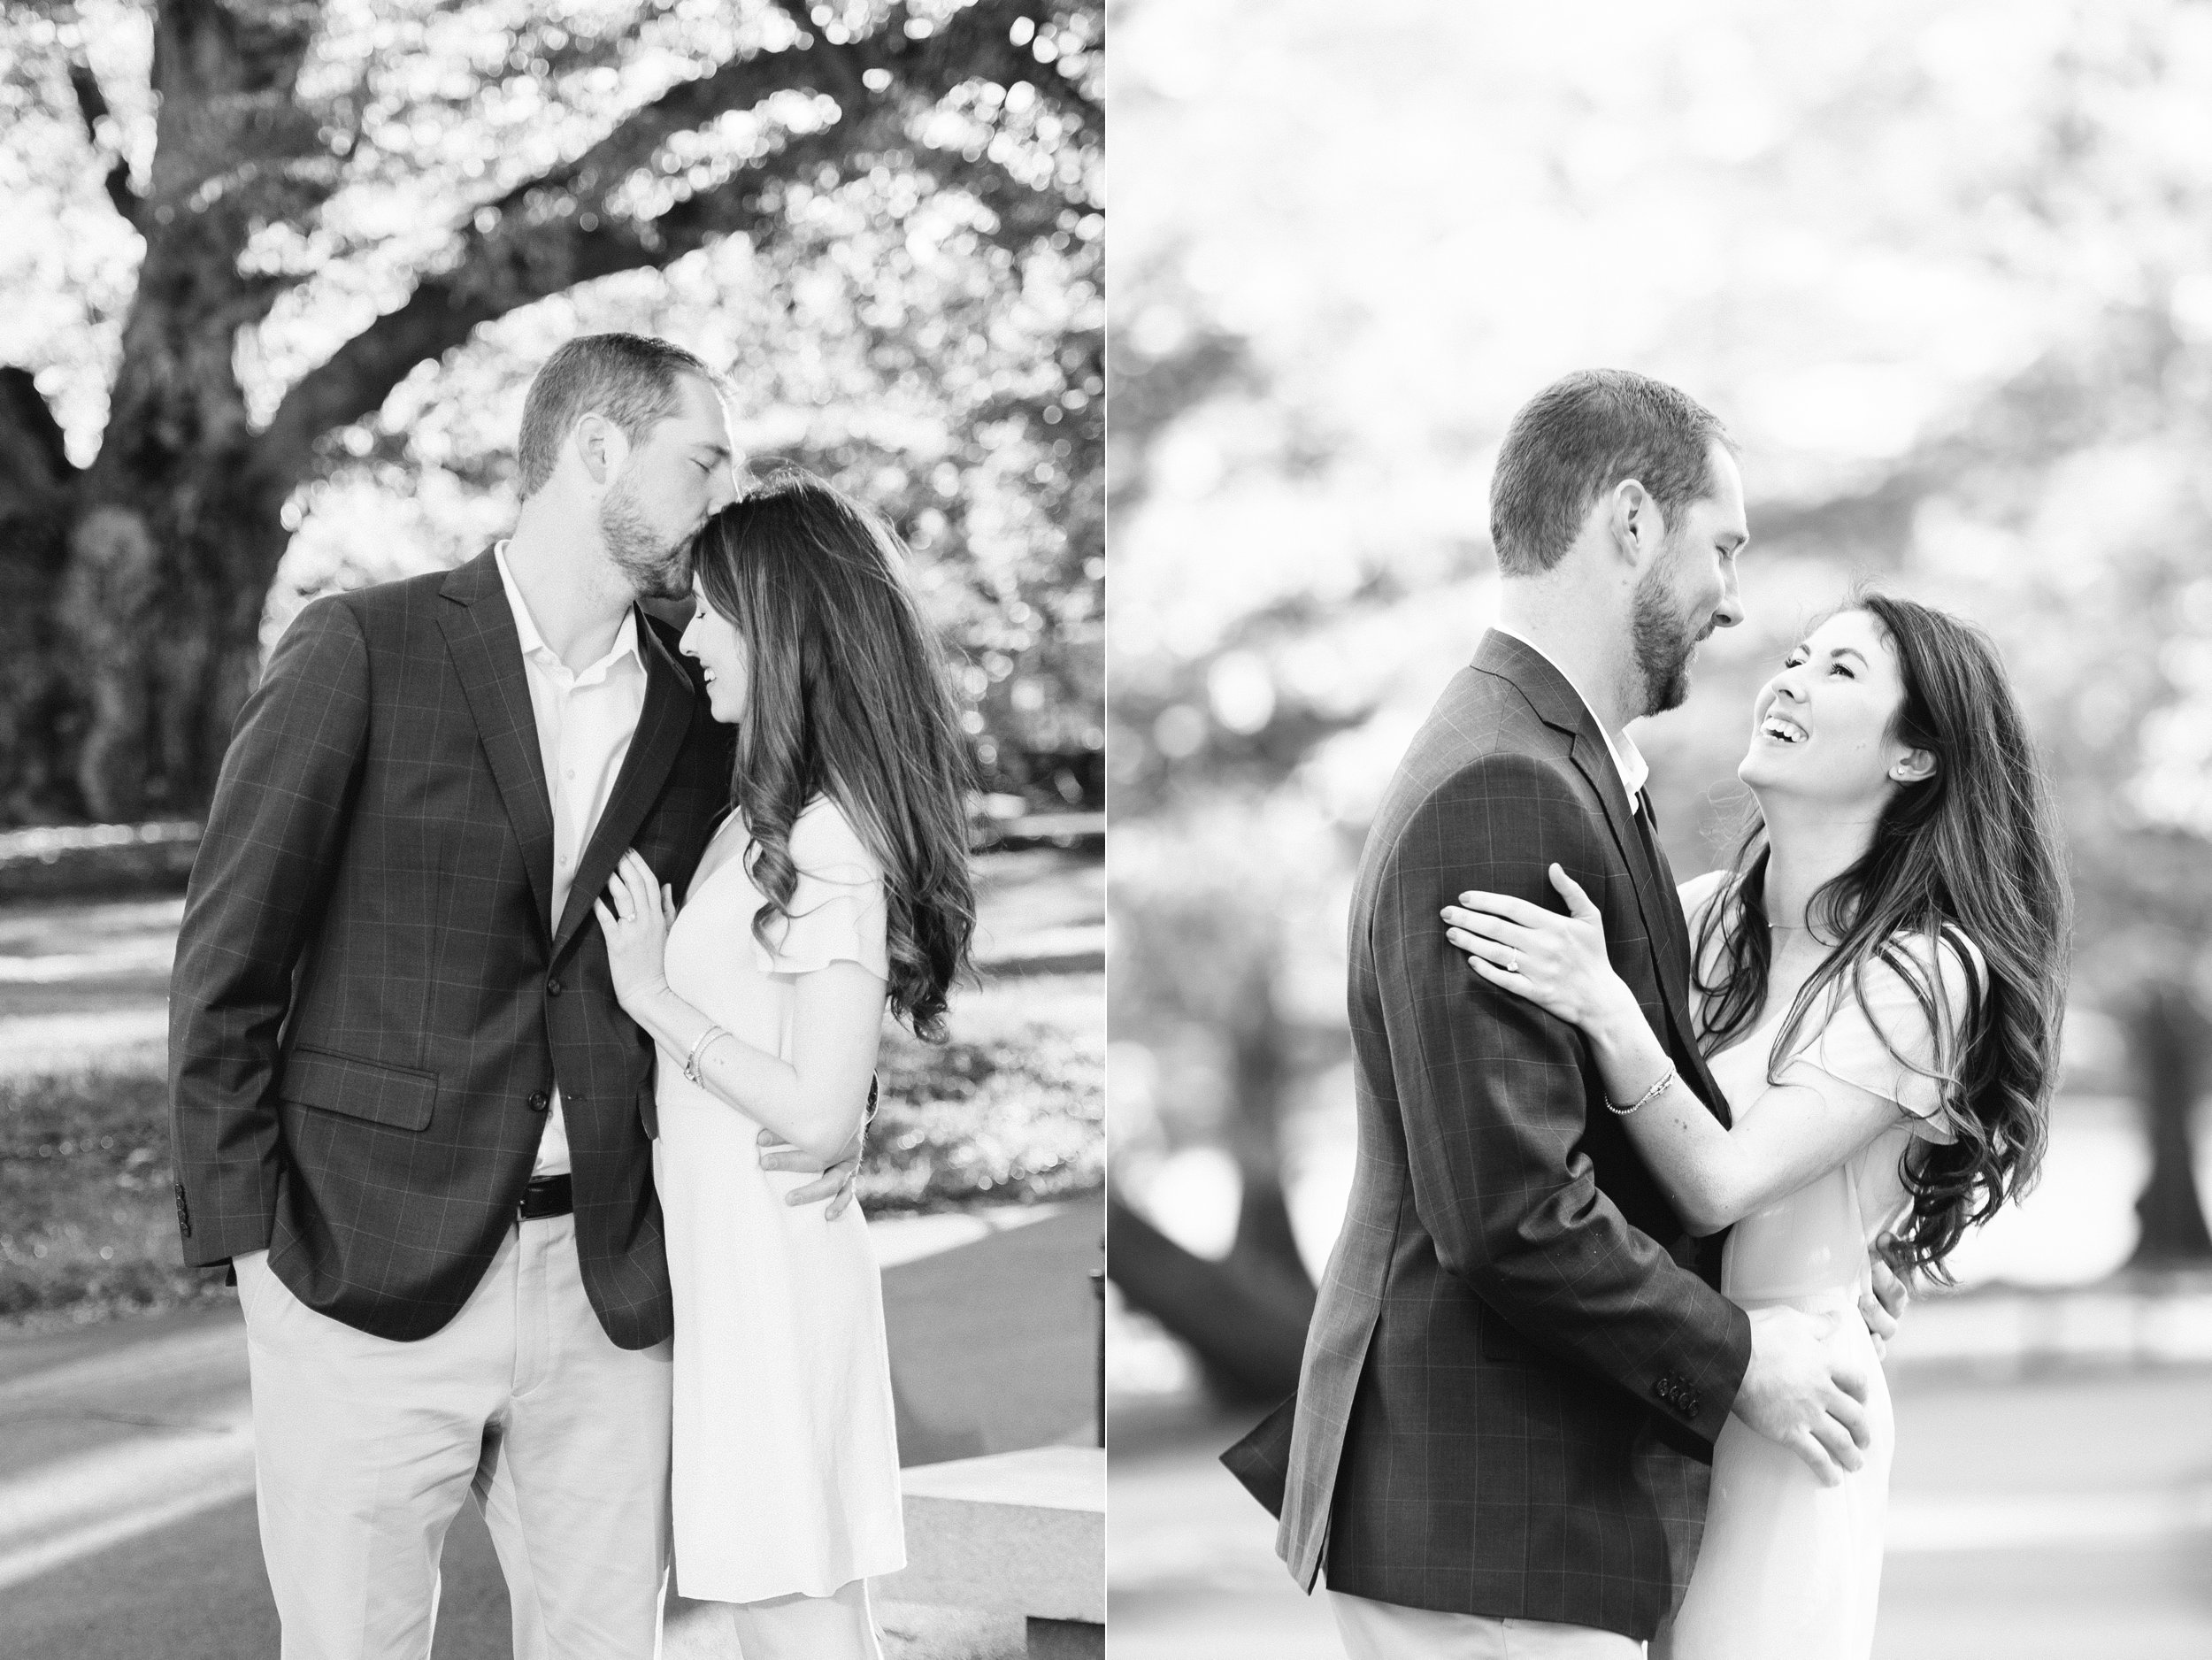 Engagement session at sunrise in Boston at the Public Garden in Black and White Classic Engagement photos